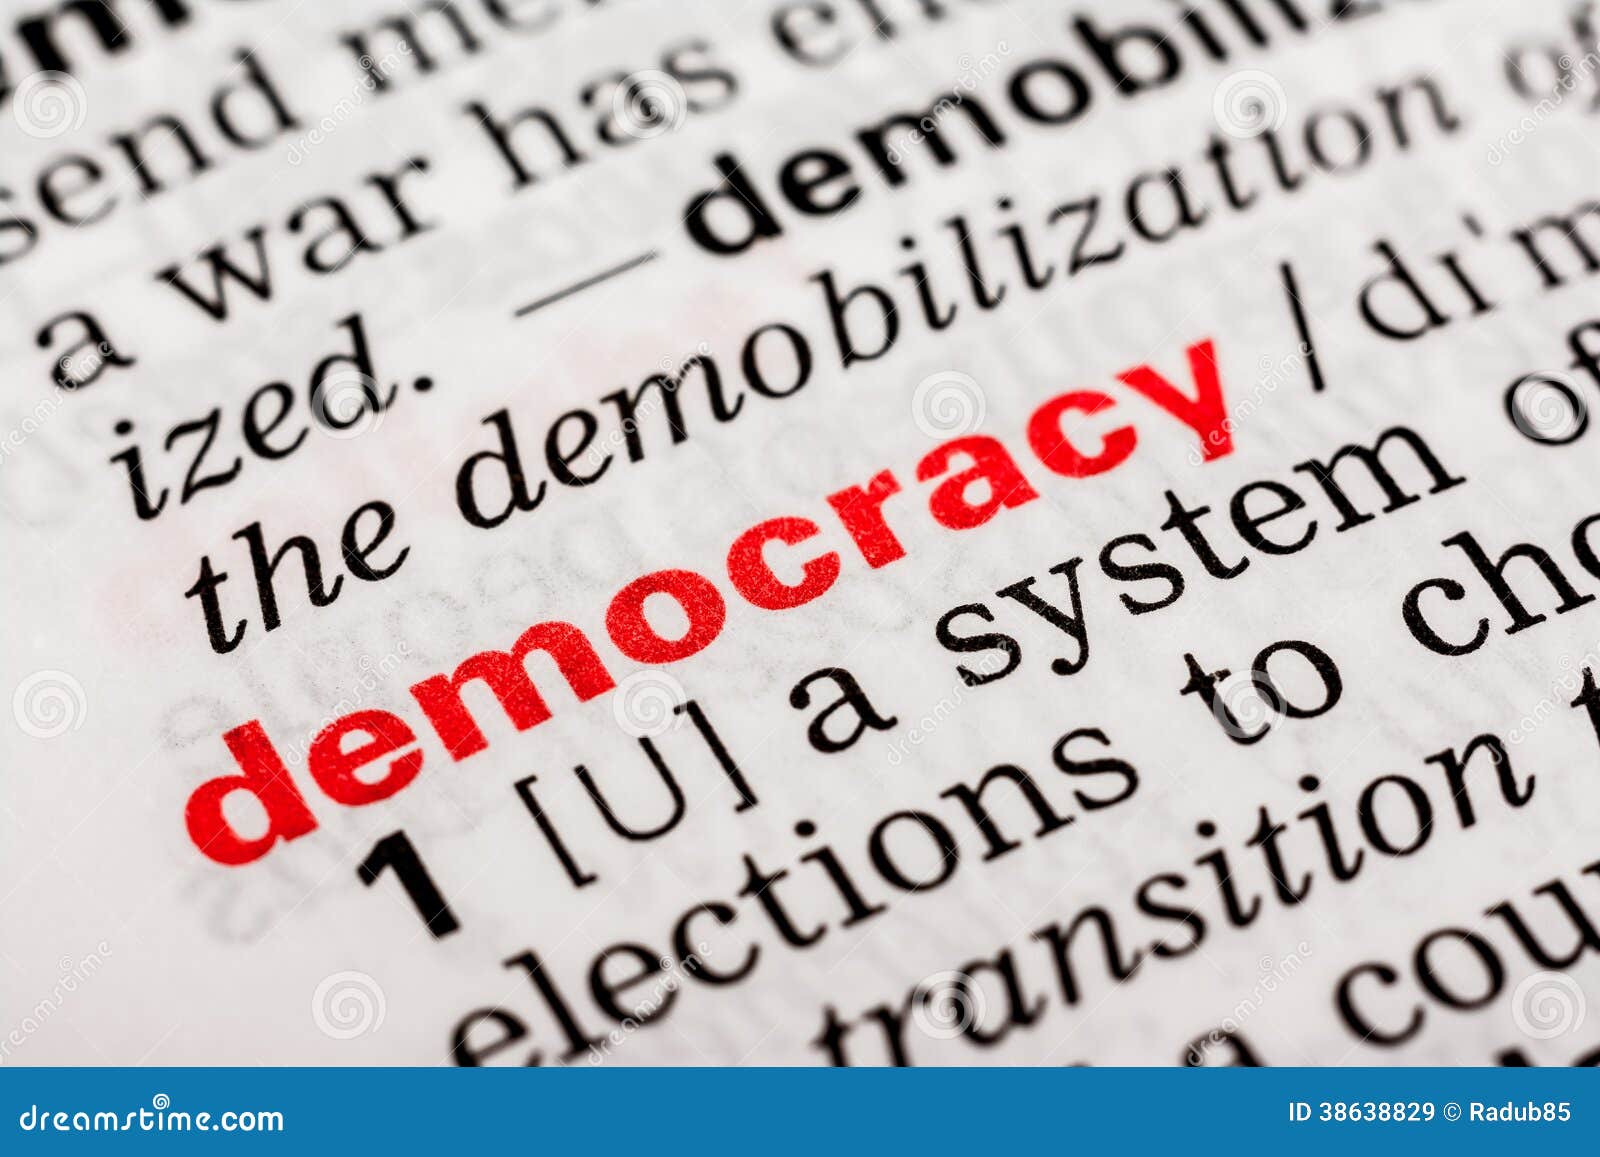 Democracy Word Definition stock image. Image of fair ...